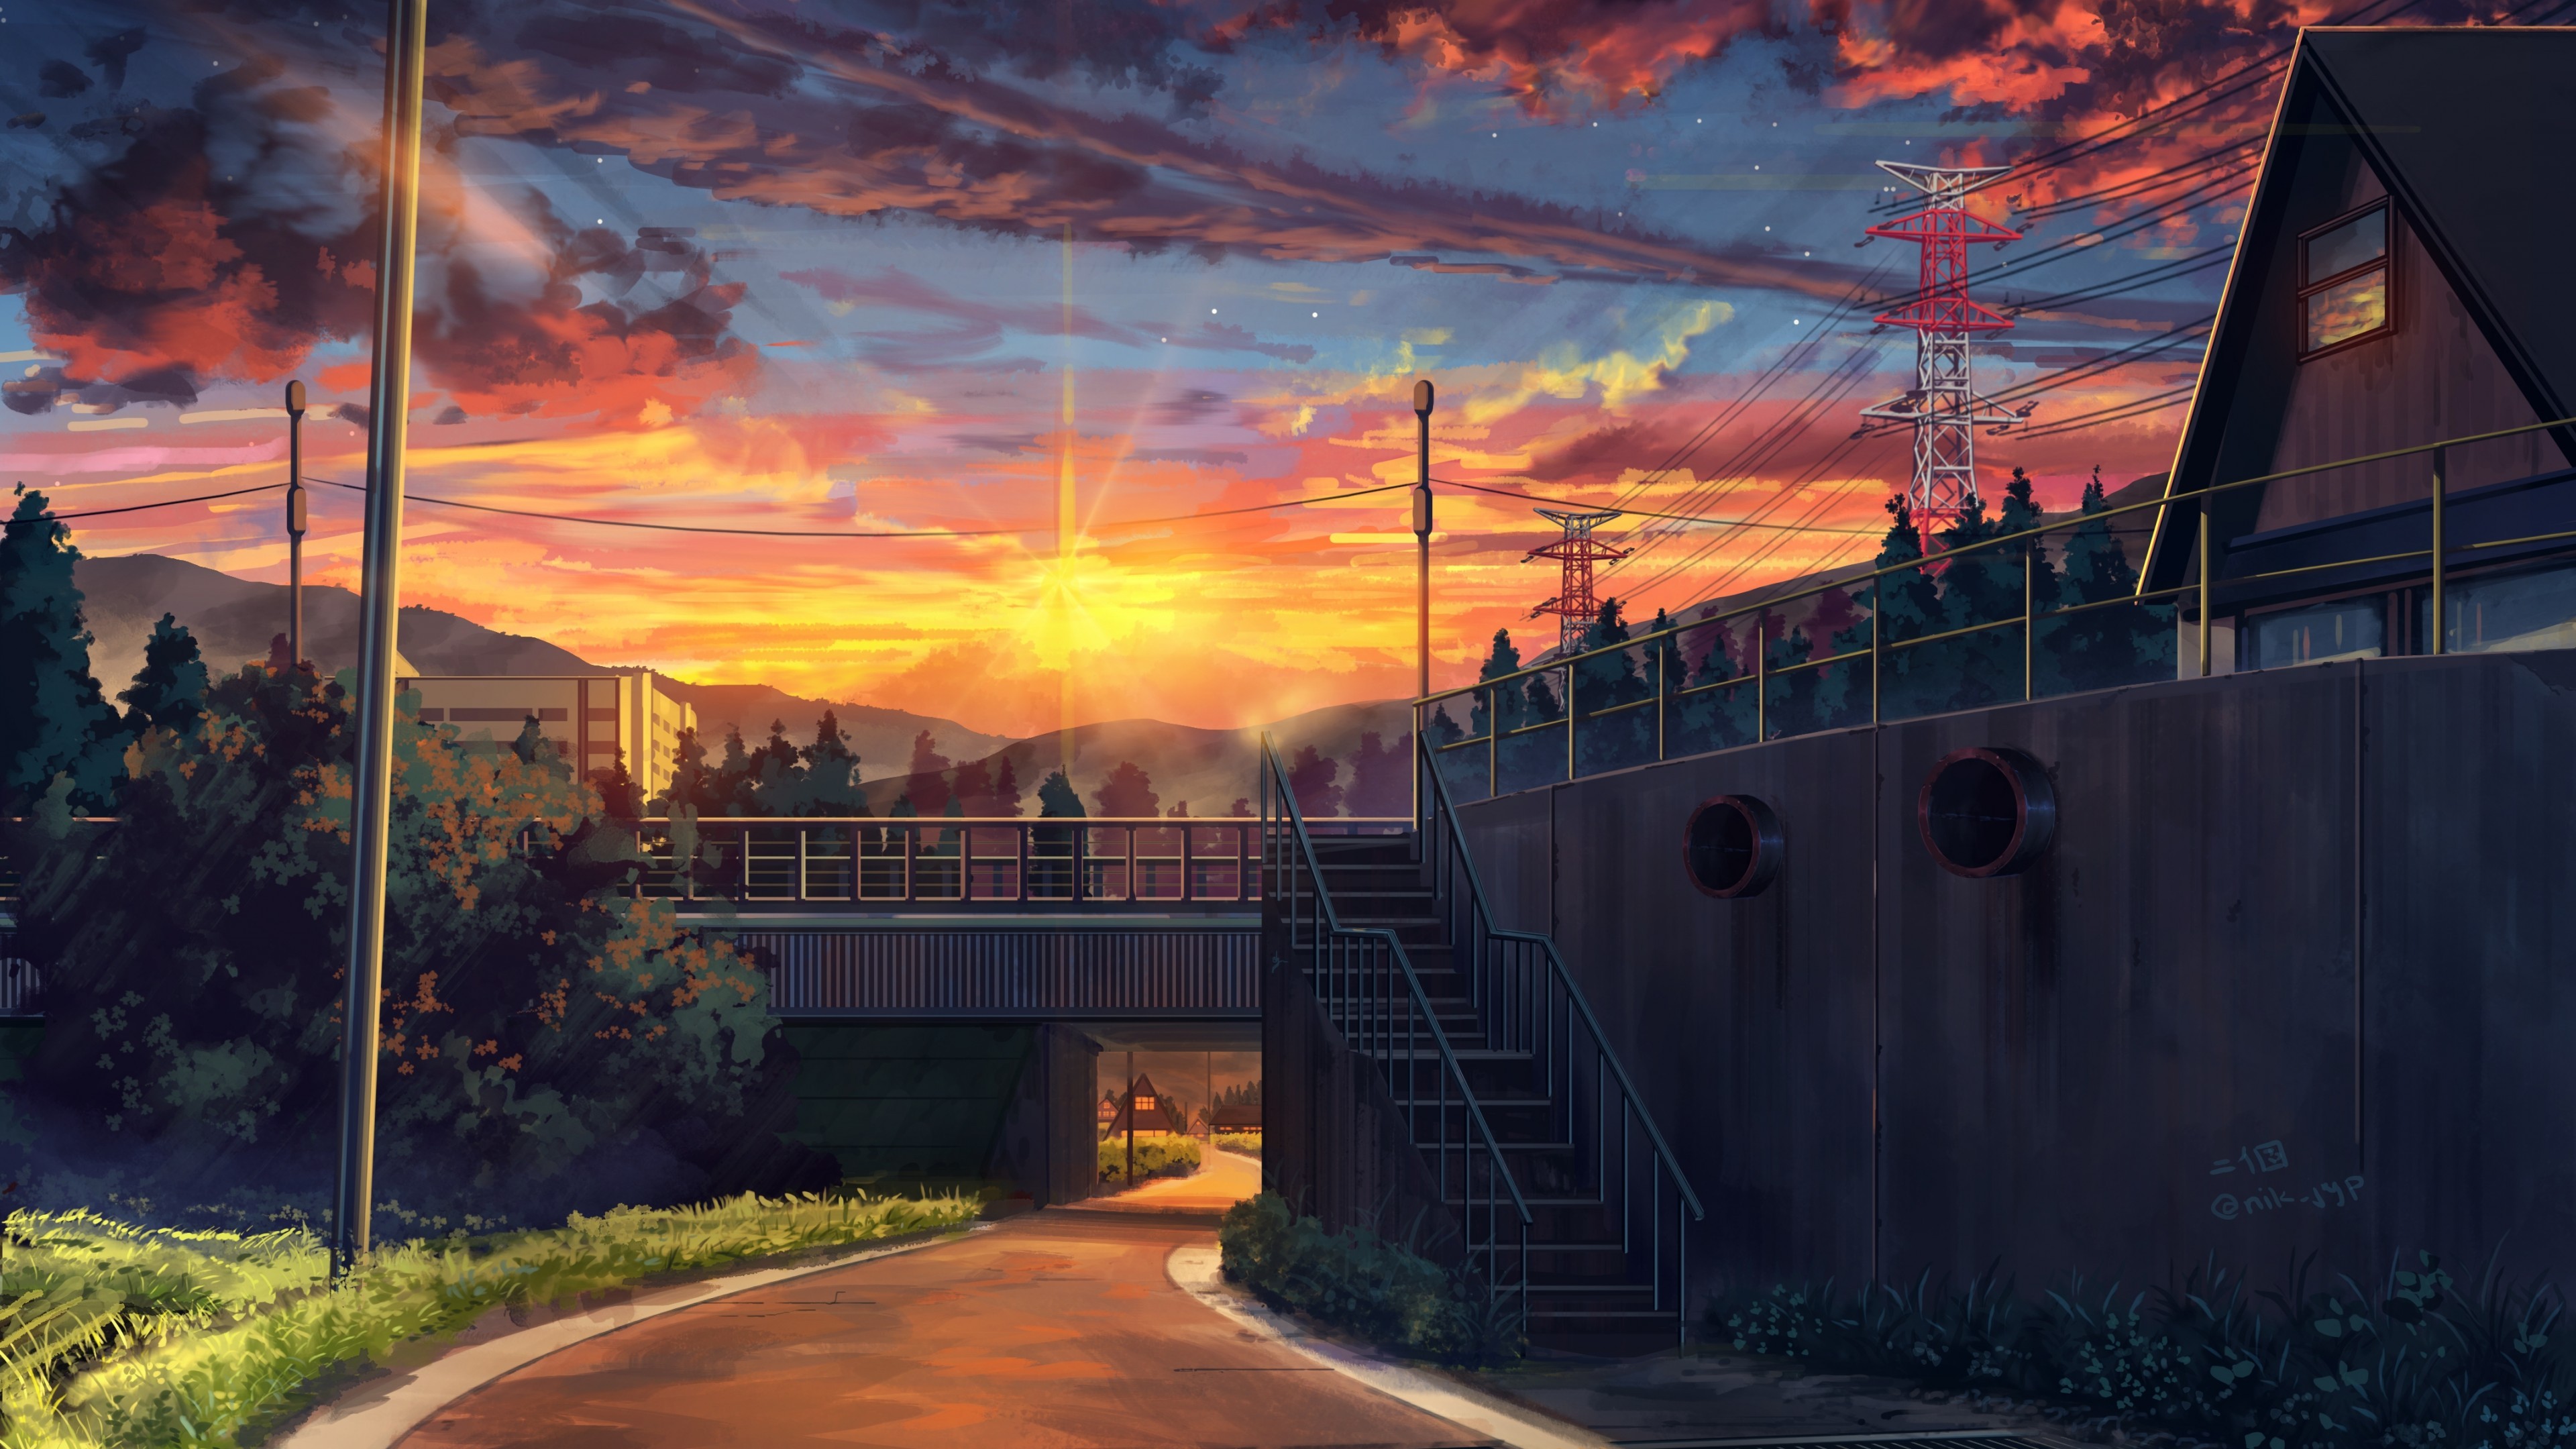 Download 3840x2160 Anime Sunset, Landscape, Scenic, Clouds